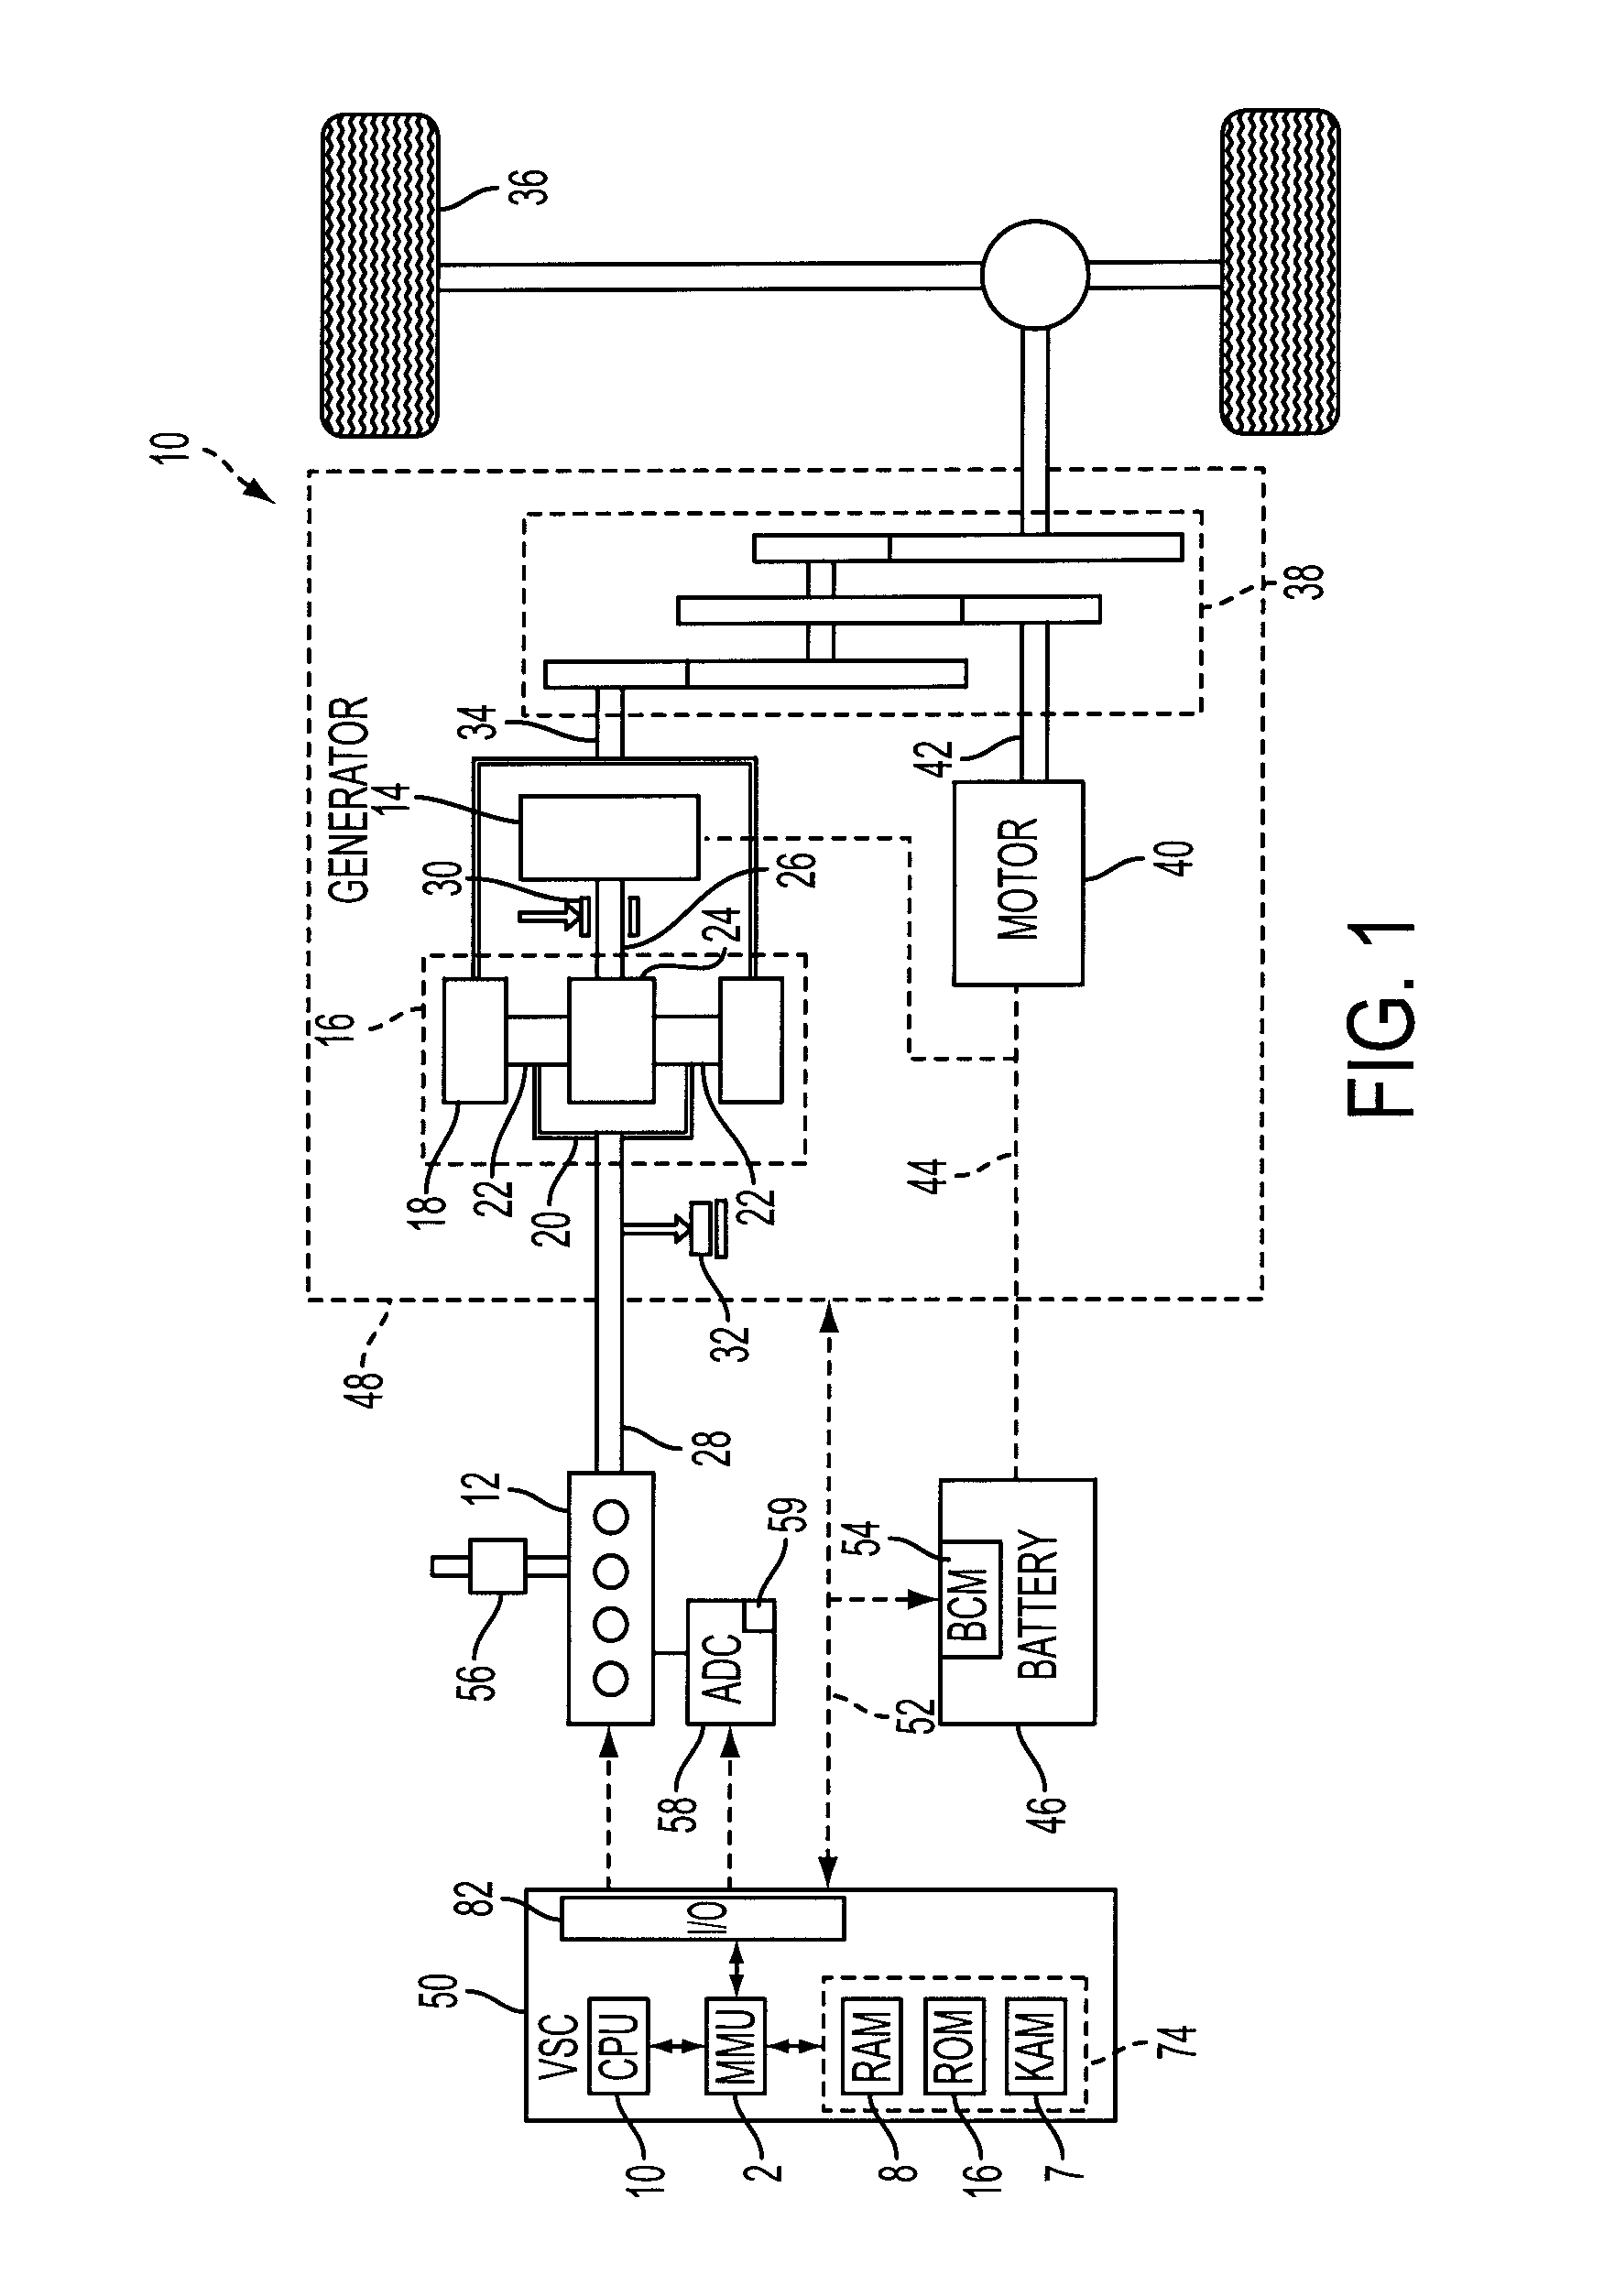 Torque-based powertrain control for vehicles